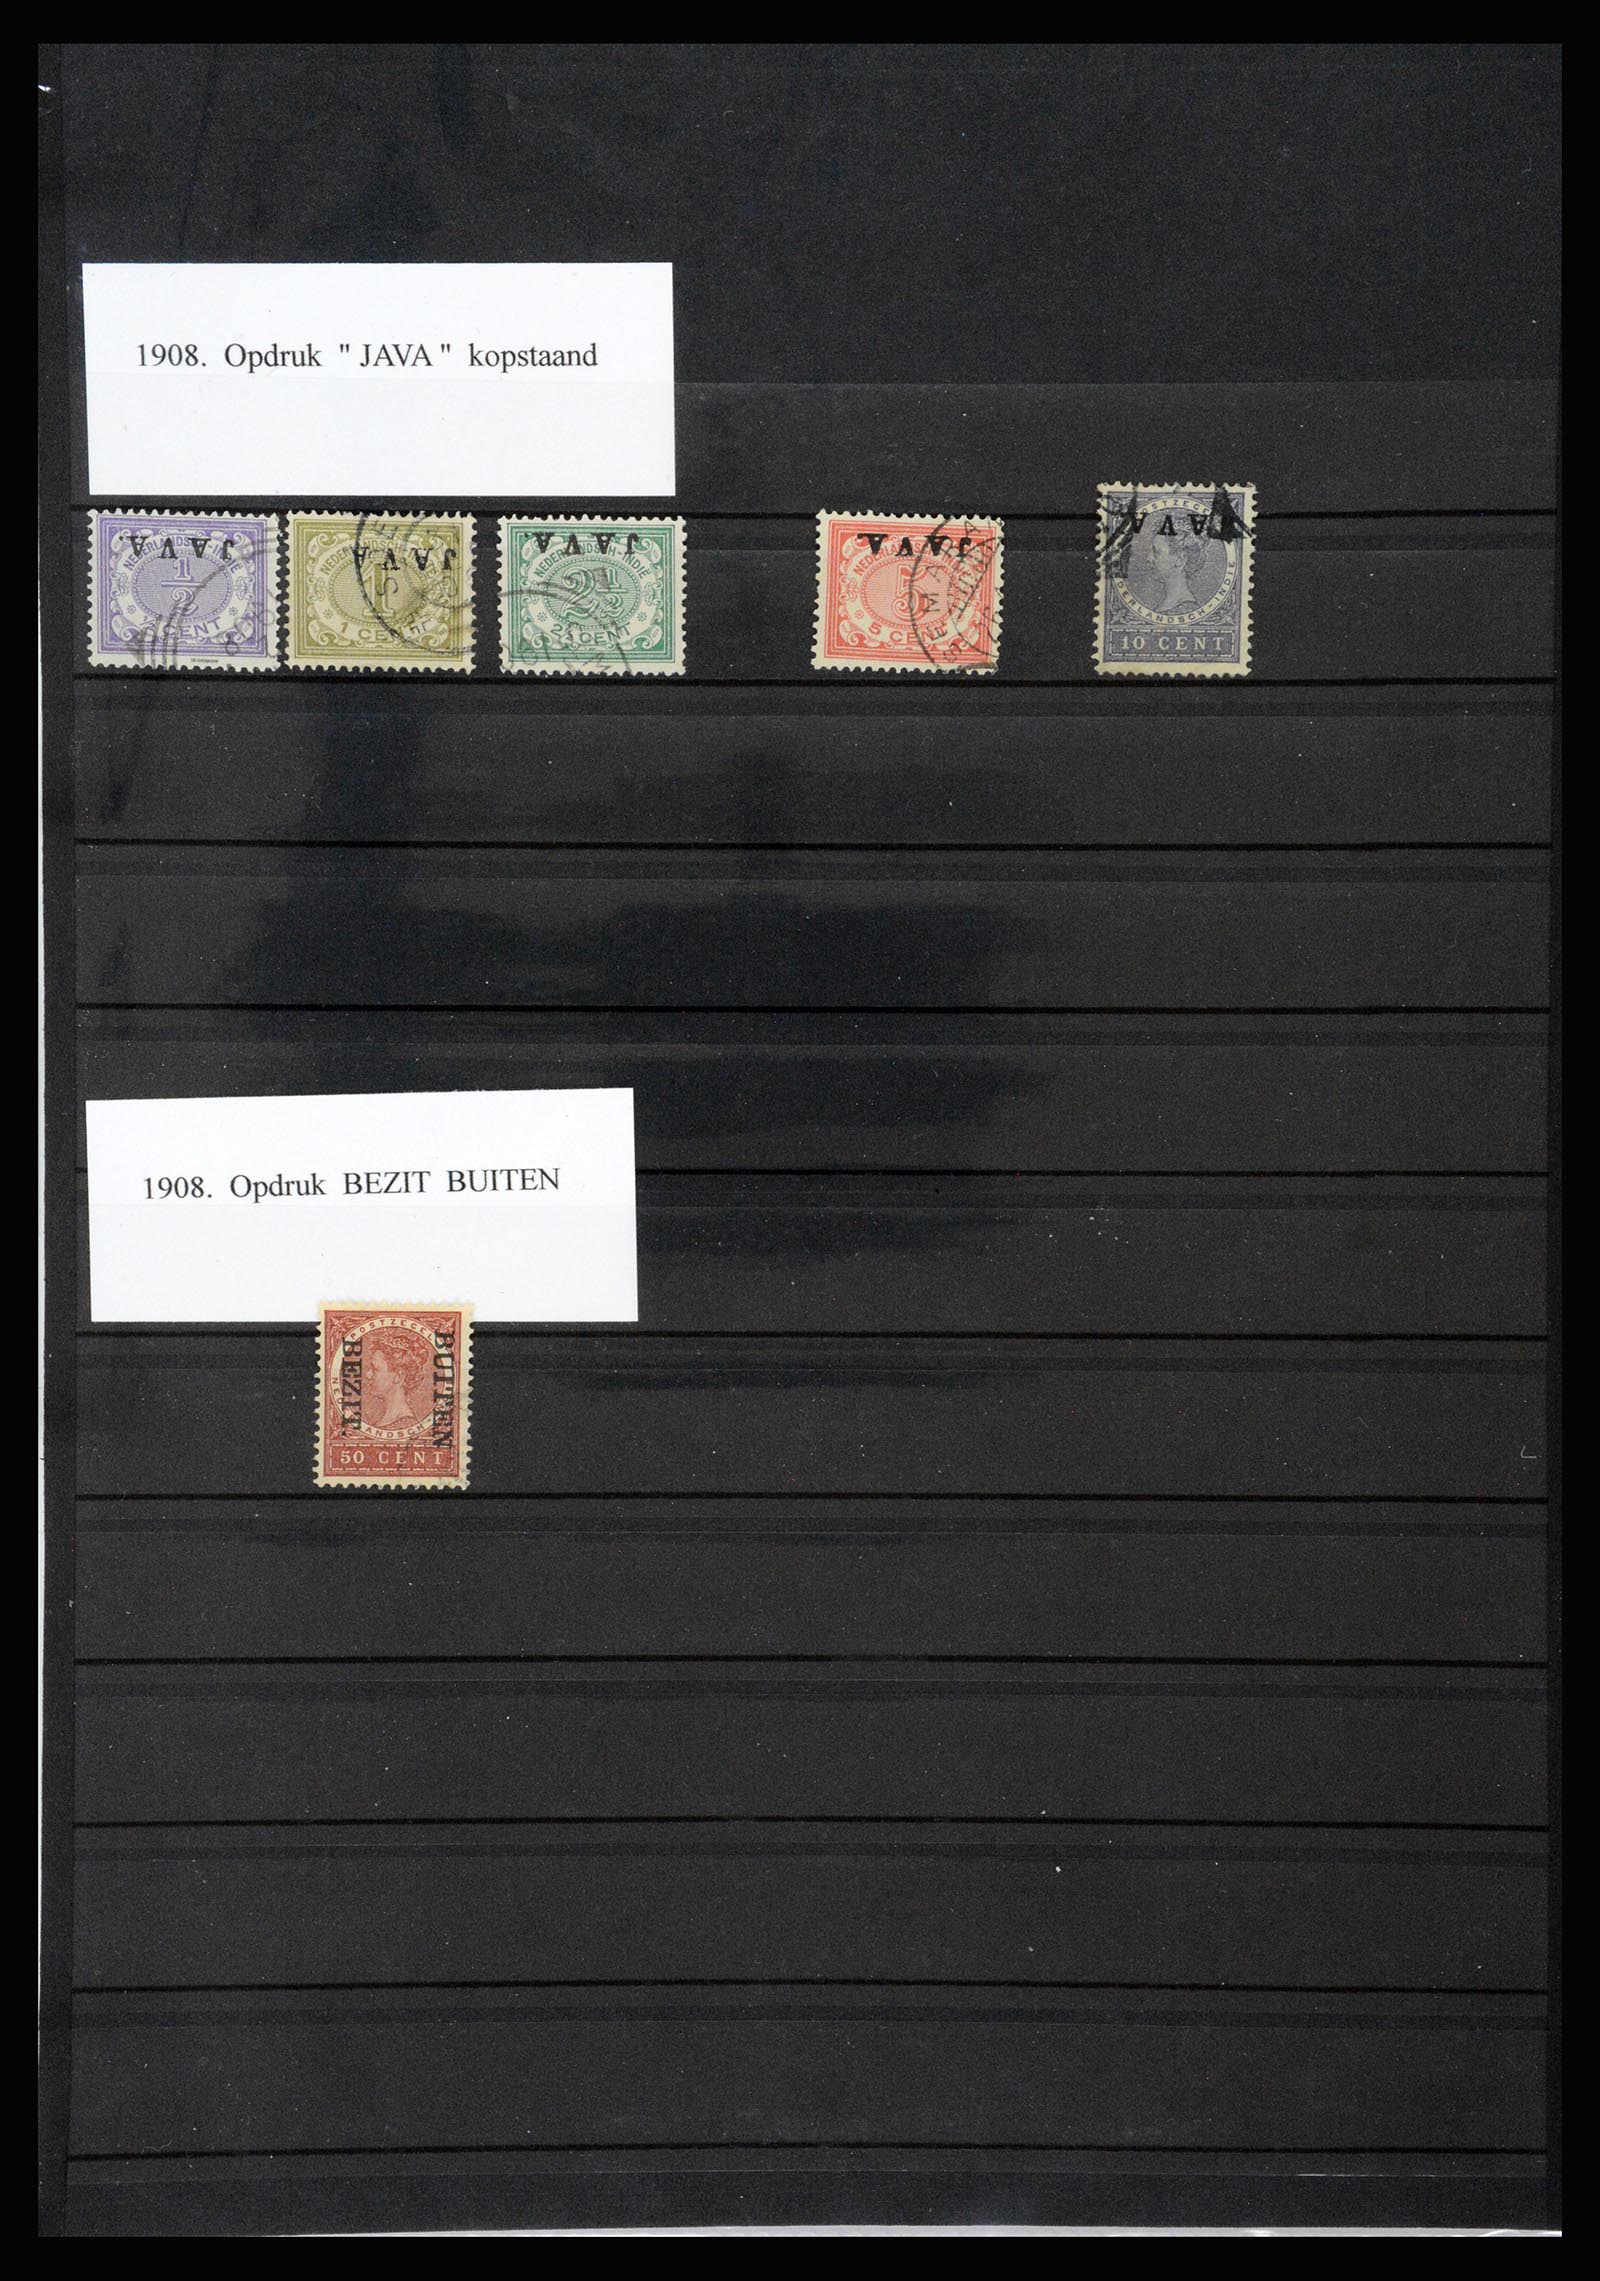 37247 038 - Stamp collection 37247 Dutch east Indies 1864-1949.